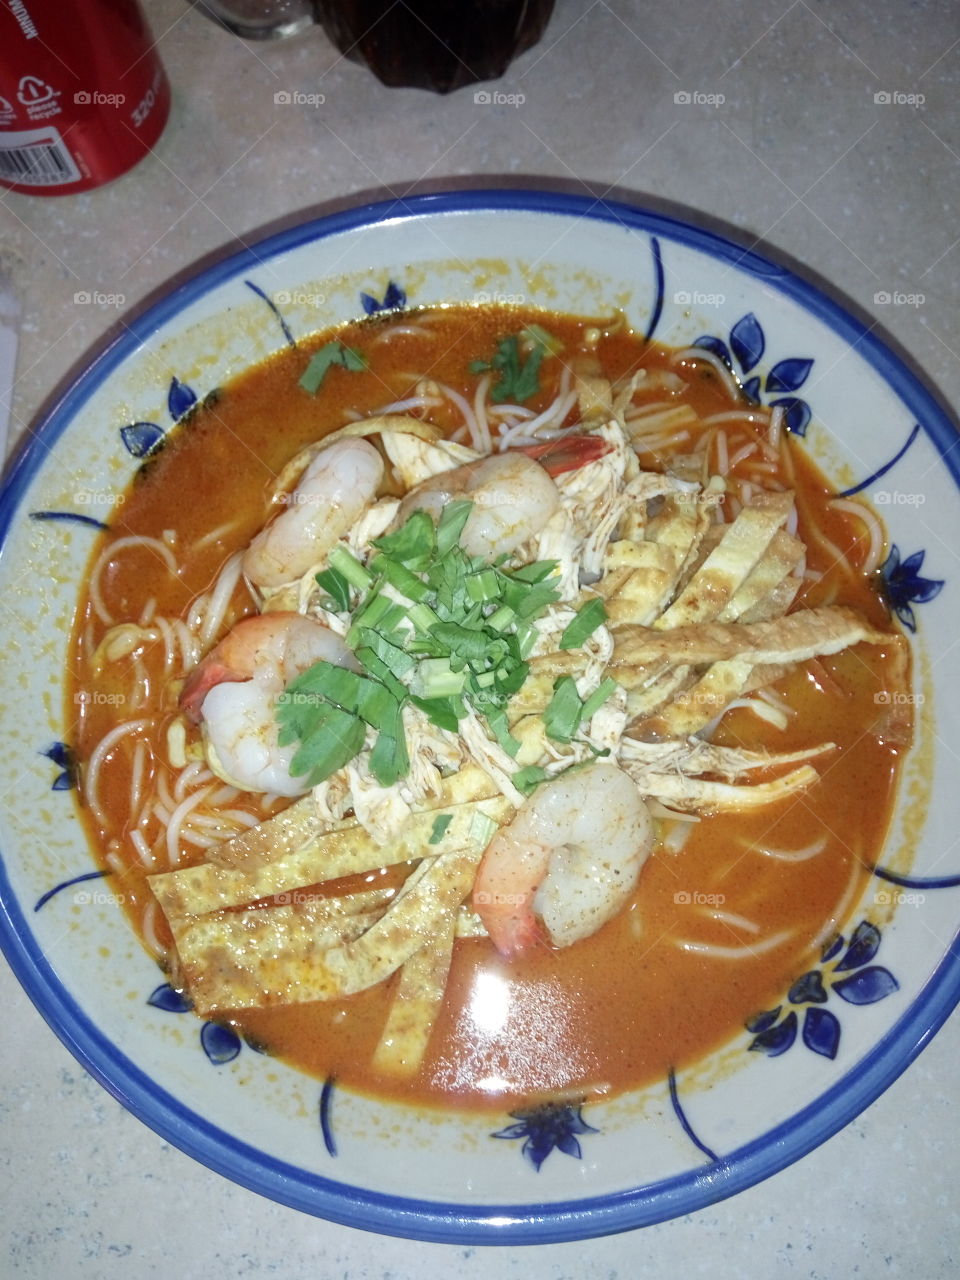 Laksa Sarawak, Sarawak famous dish, spicy noodle soup with shrimp paste ..

Laksa consists of rice noodles or rice vermicelli with shredded chicken, prawns and fried egg slices, served in spicy soup based on rich and creamy coconut milk and mix with hot and spicy paste..